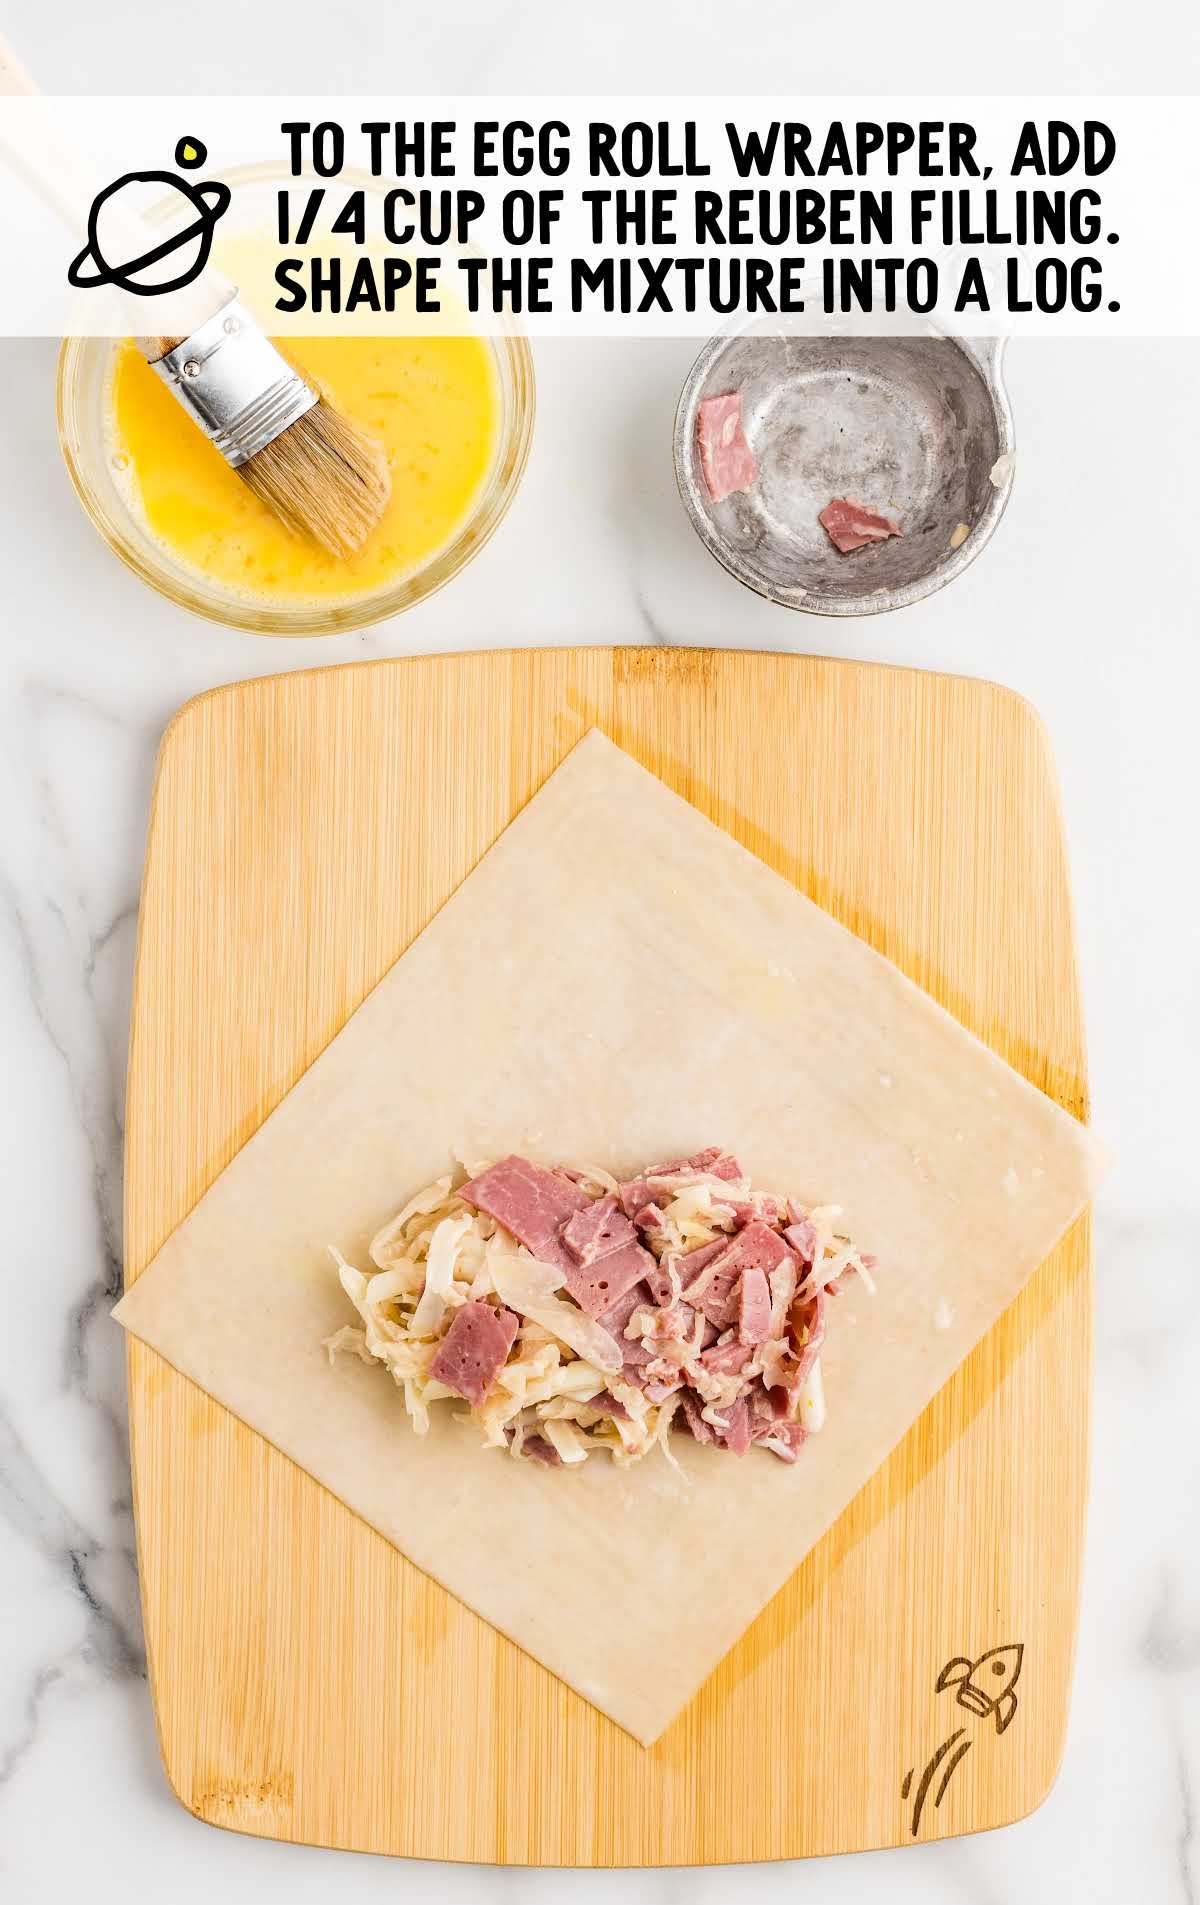 reuben mixture placed on top of the wrapper